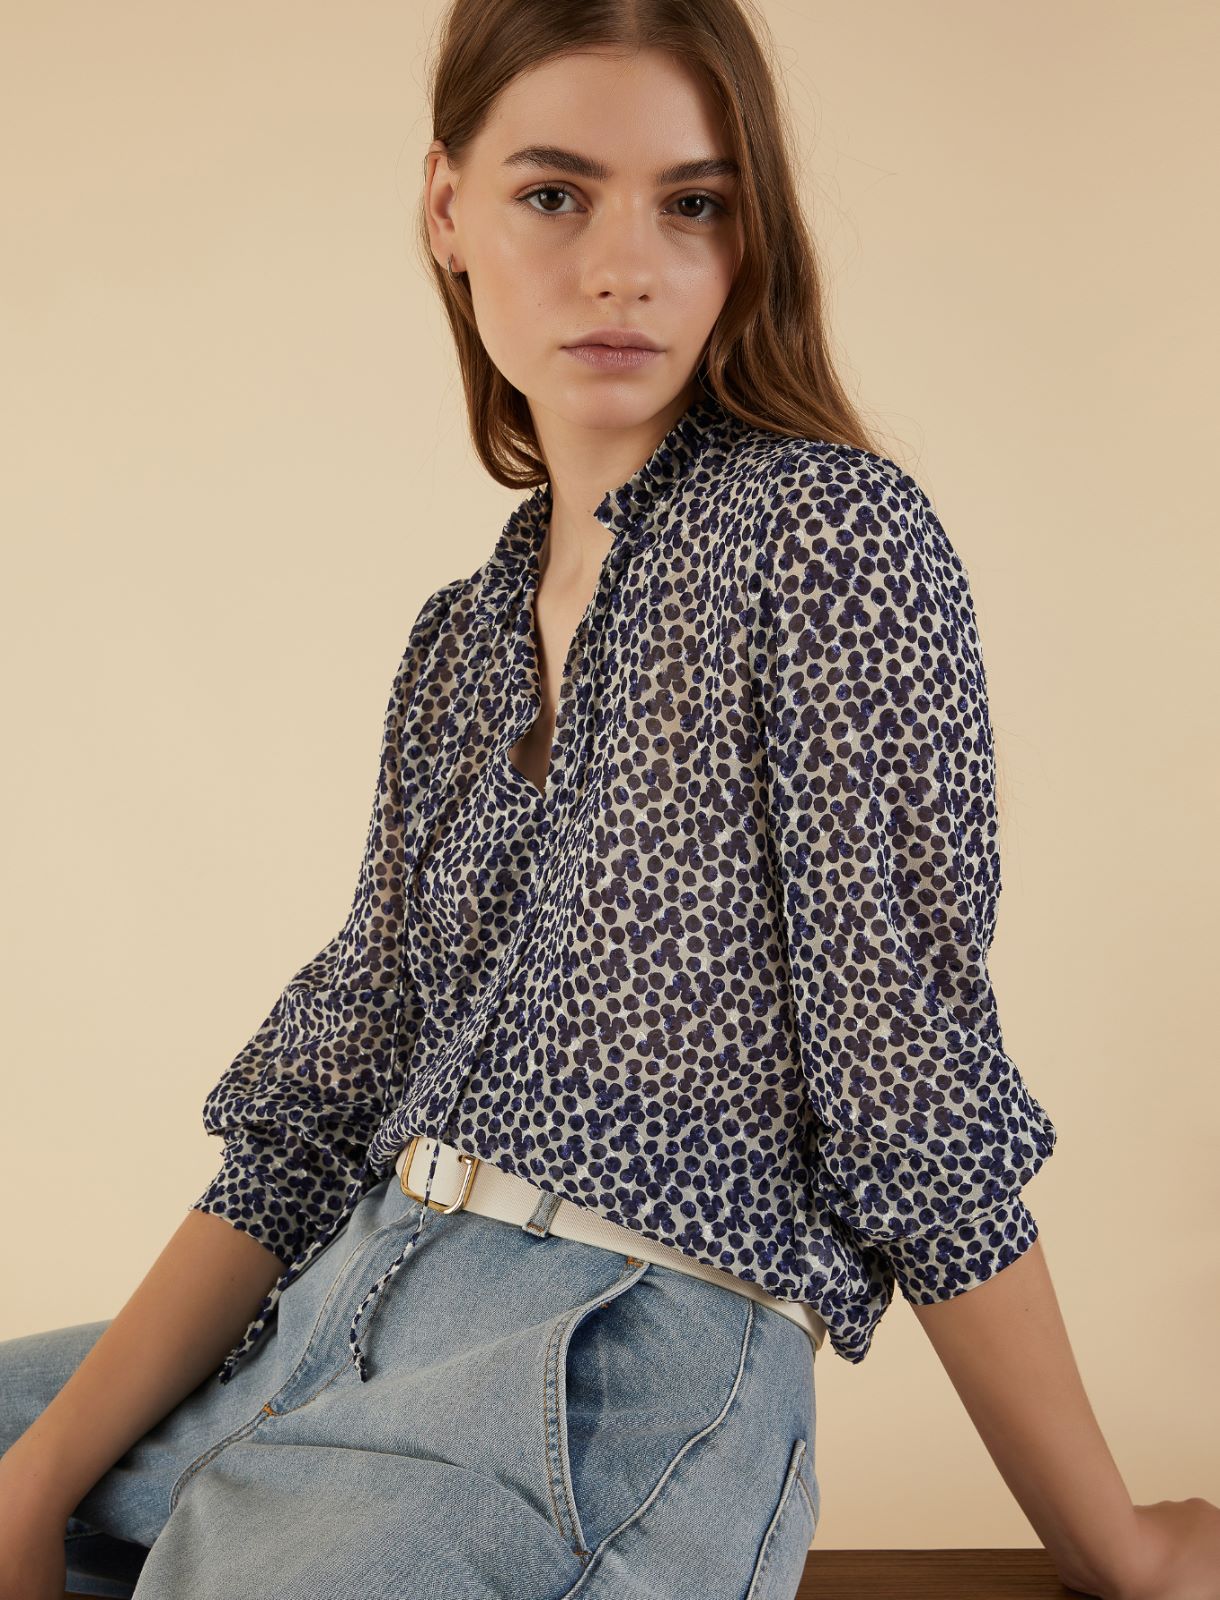 Dotted Swiss blouse - Navy - Marella - 4